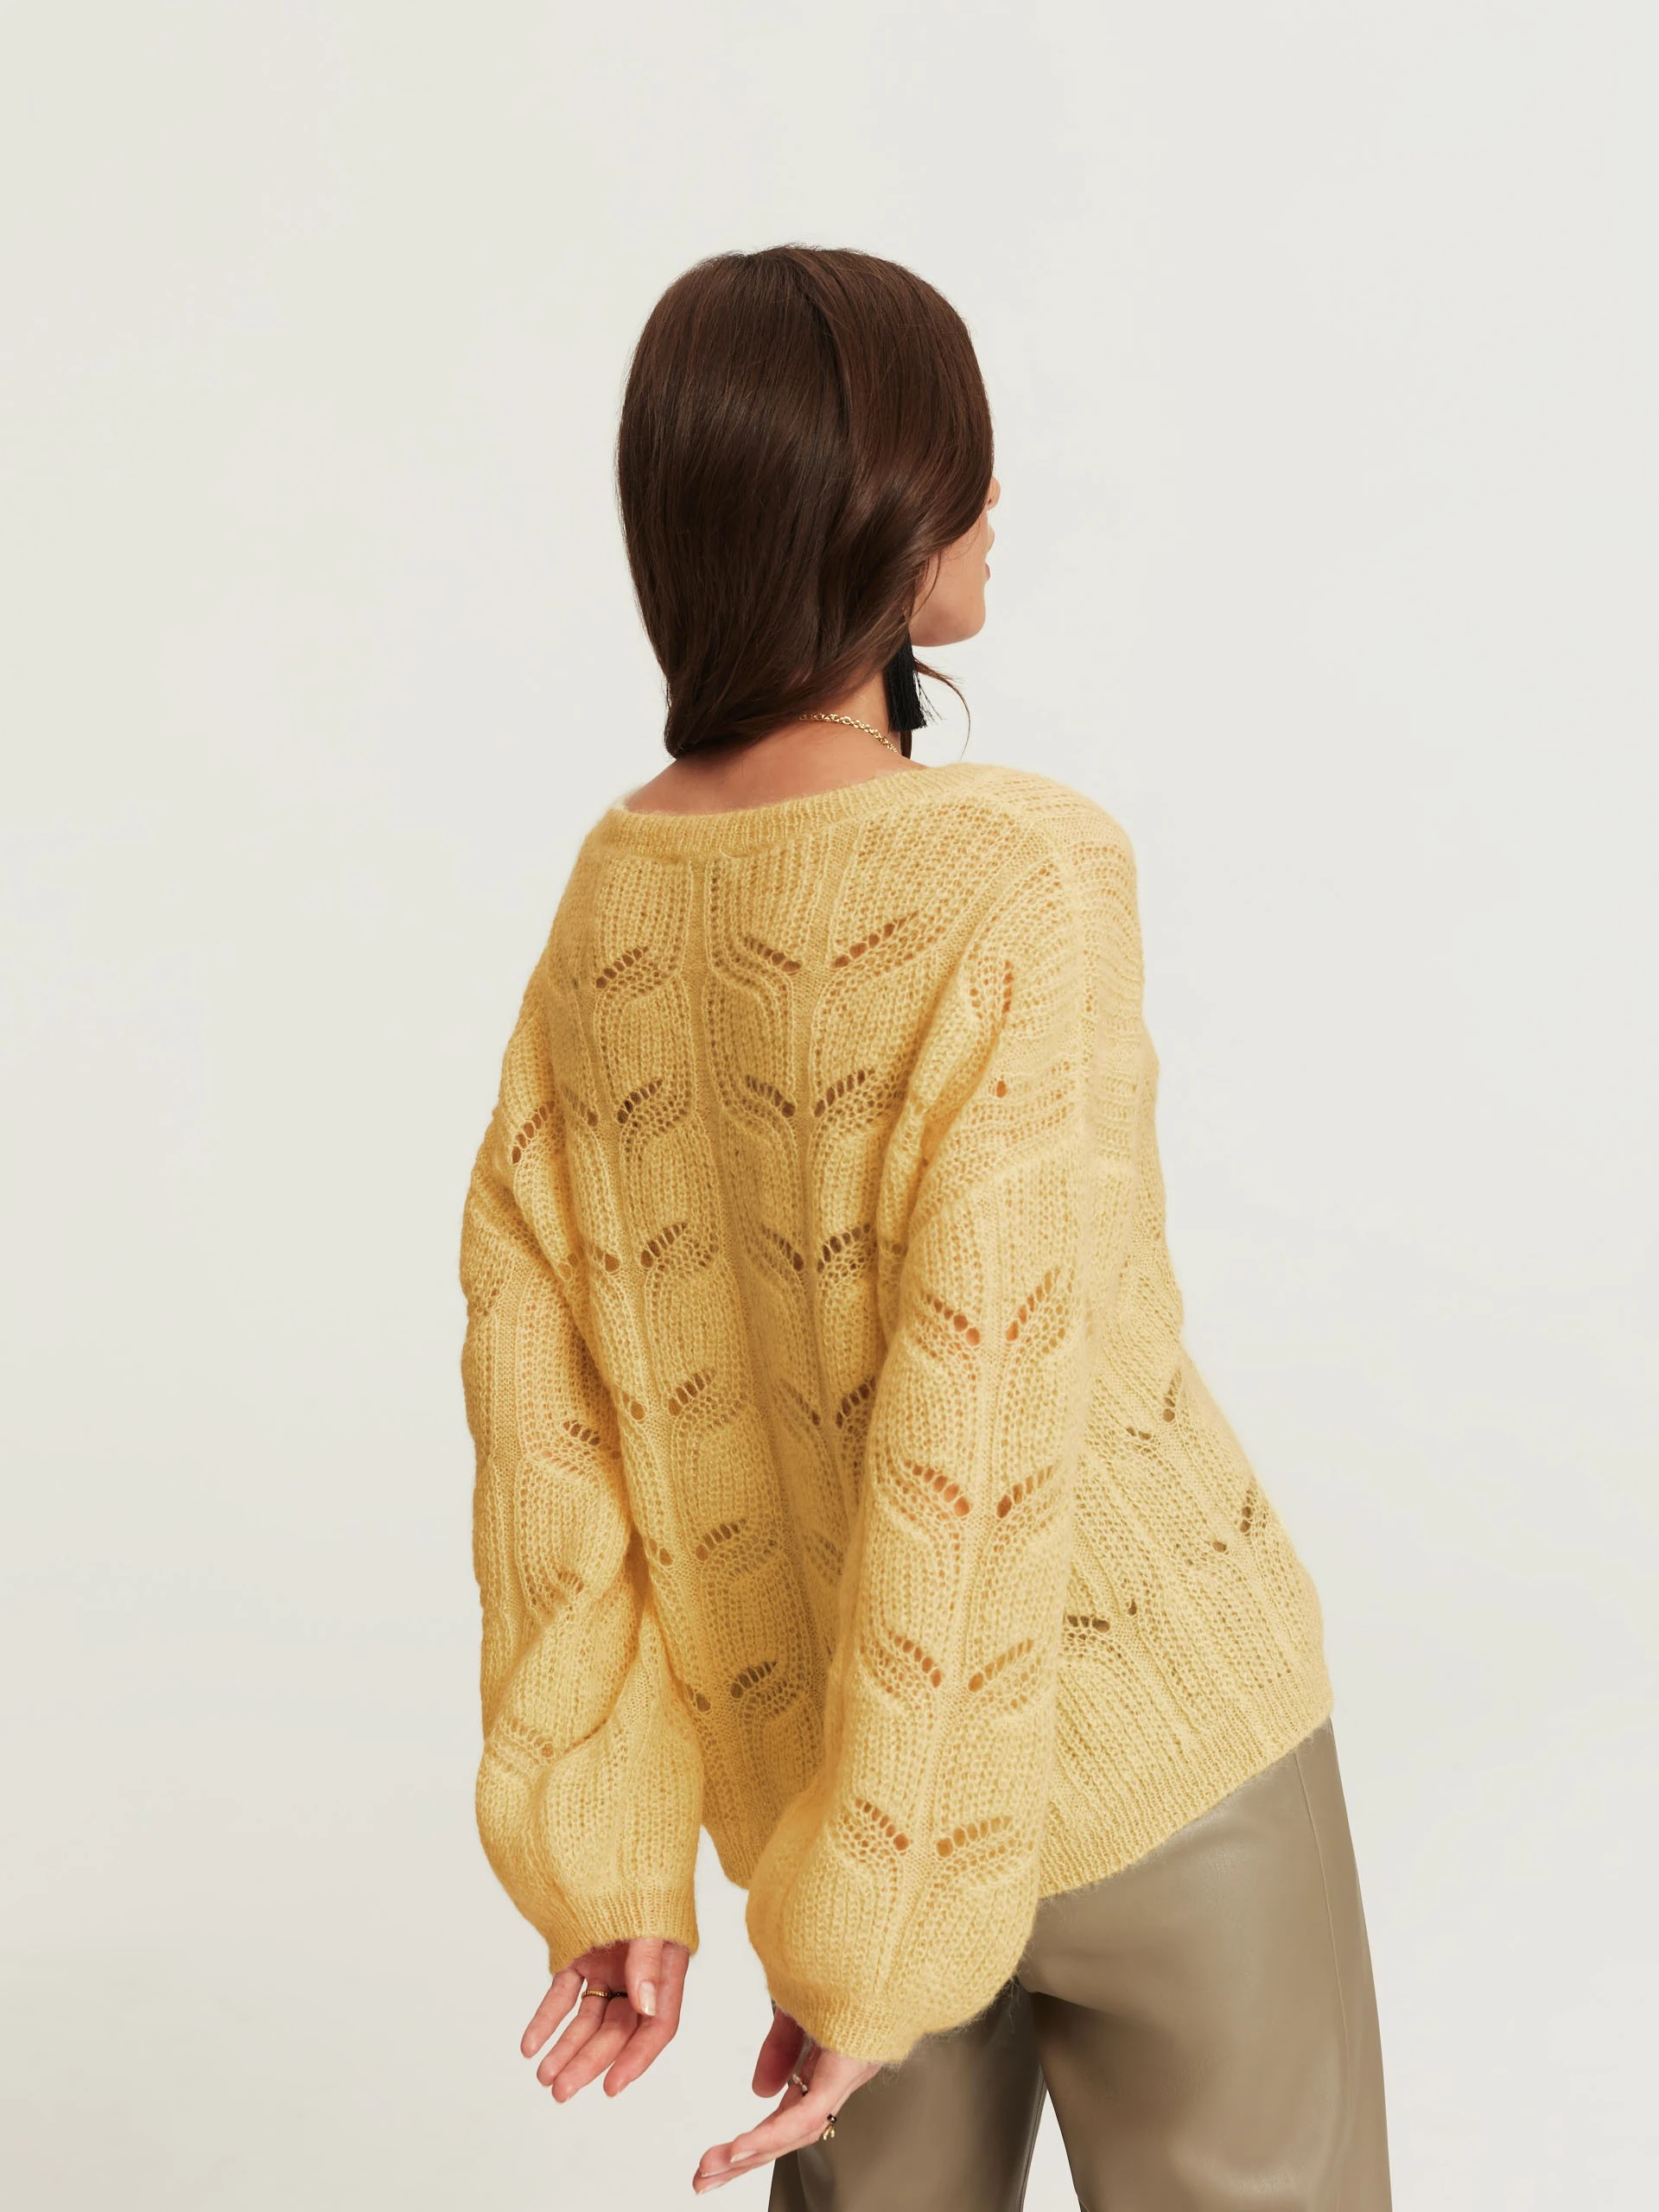 Bright yellow mohair sweater